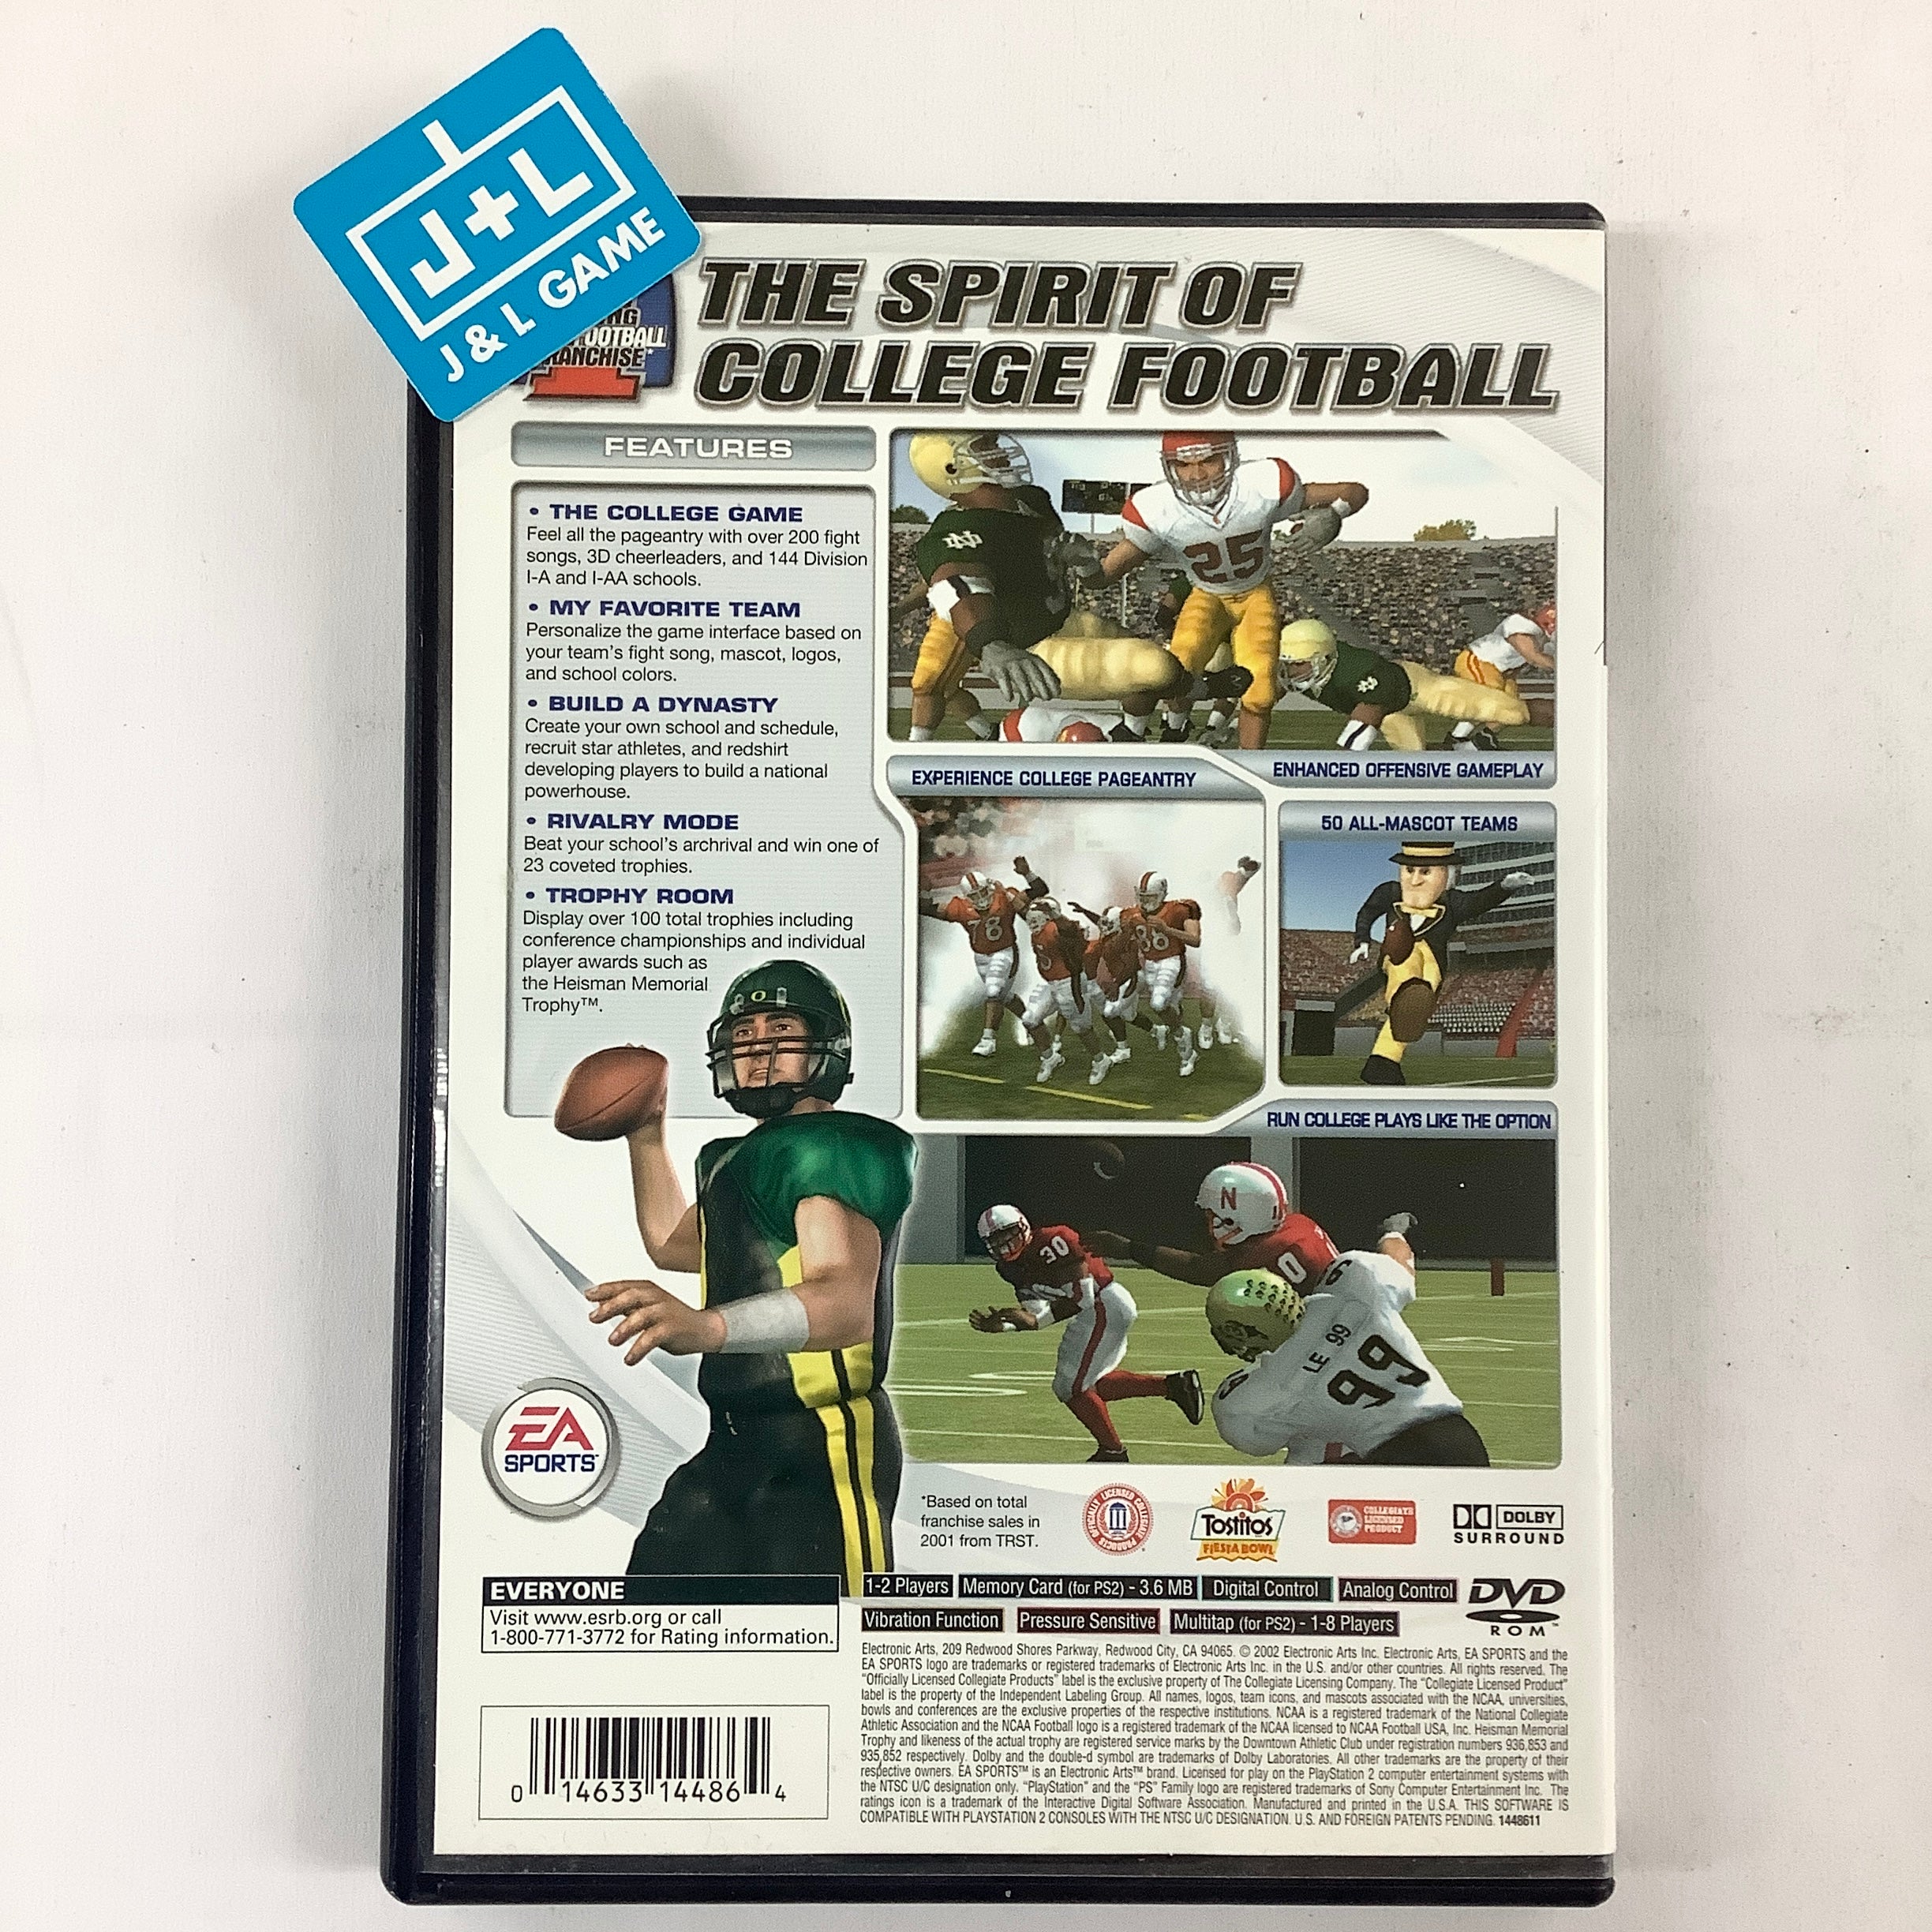 NCAA Football 2003 - (PS2) PlayStation 2 [Pre-Owned] Video Games EA Sports   